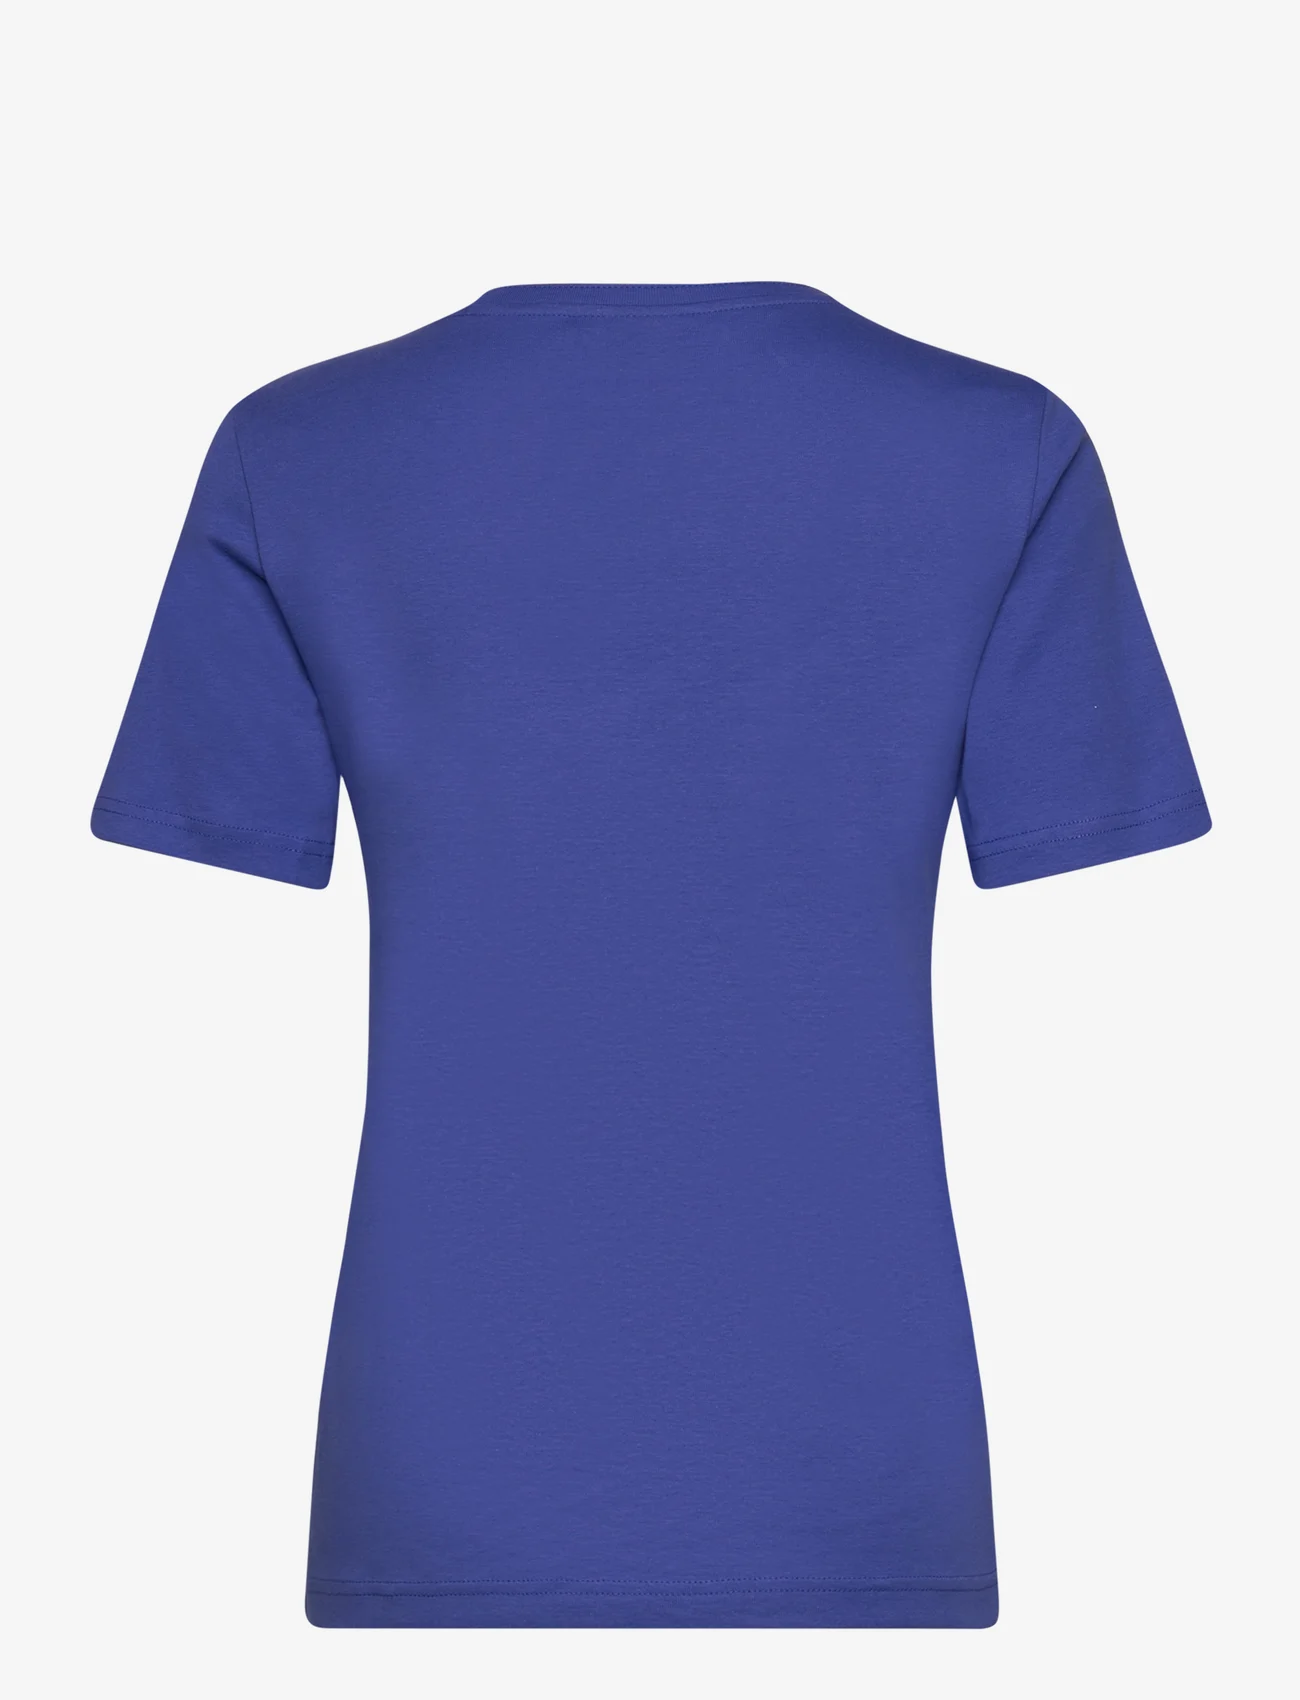 Brandtex - T-shirt s/s - lowest prices - clear blue - 1